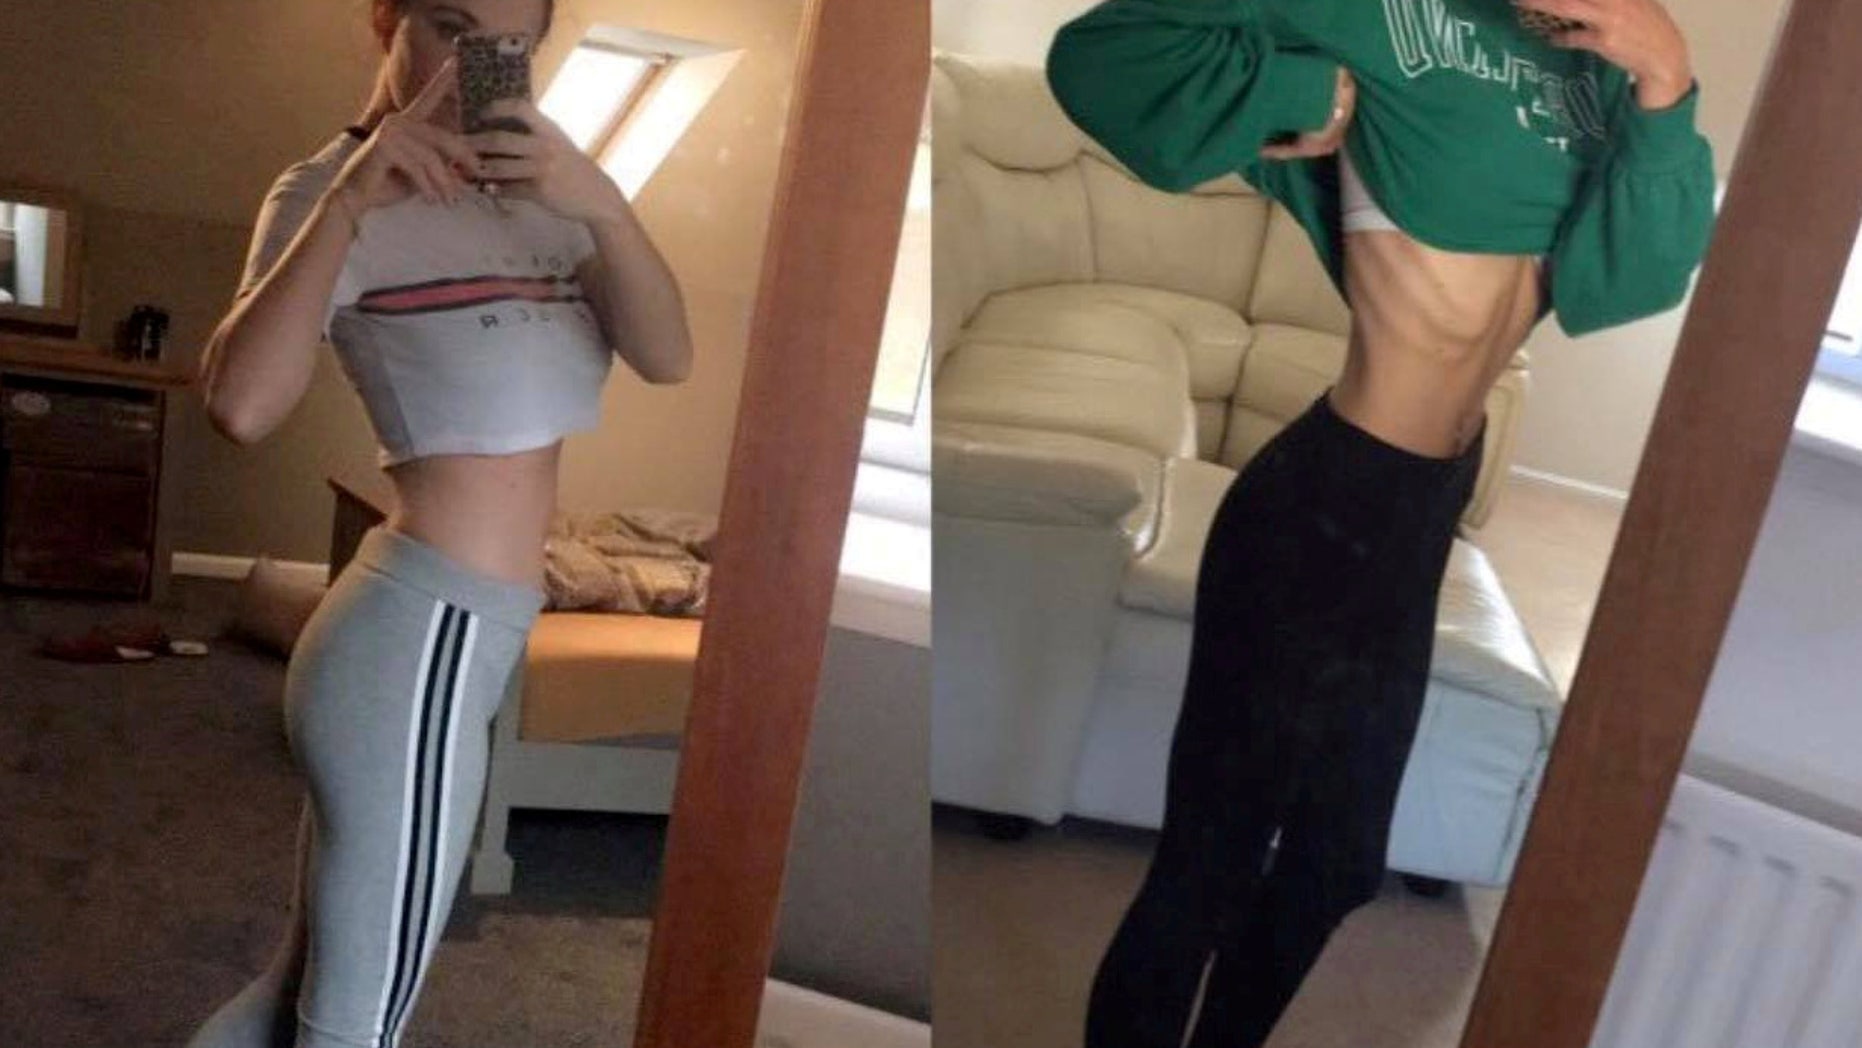 (L-R) Chloe Frome's recovery at 4 weeks, and how she looked before.